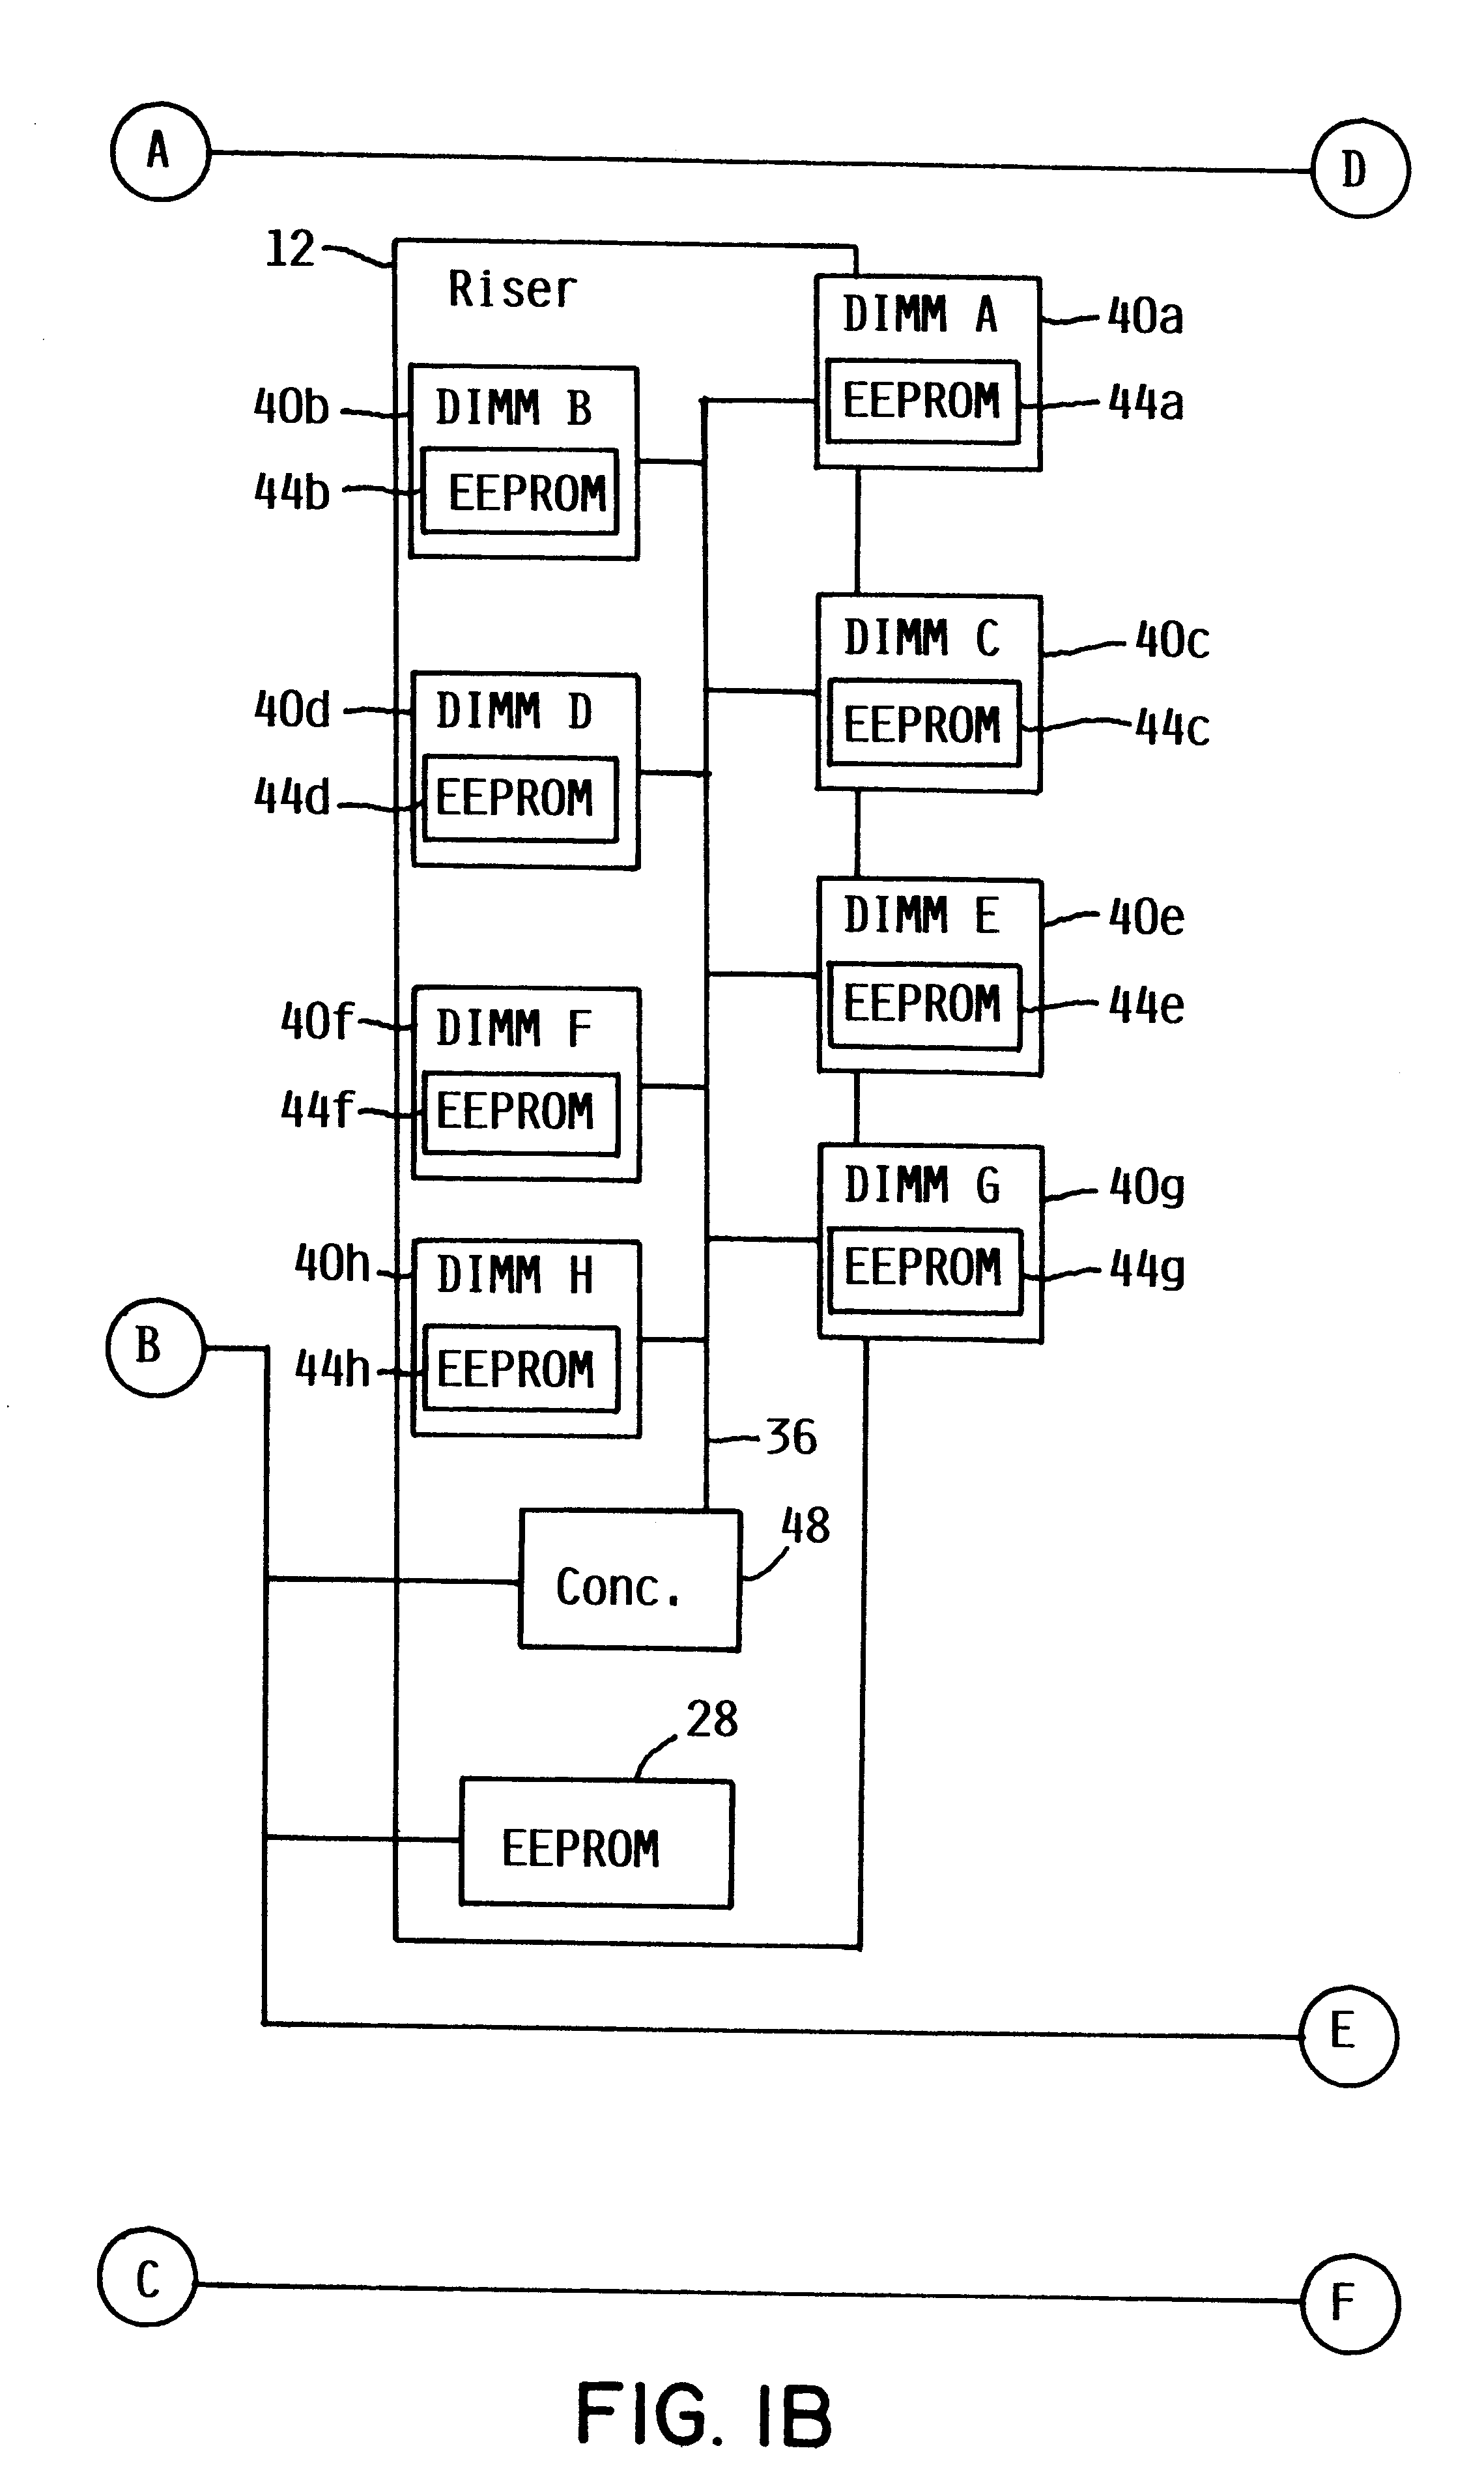 Method, system, and program for determining system configuration